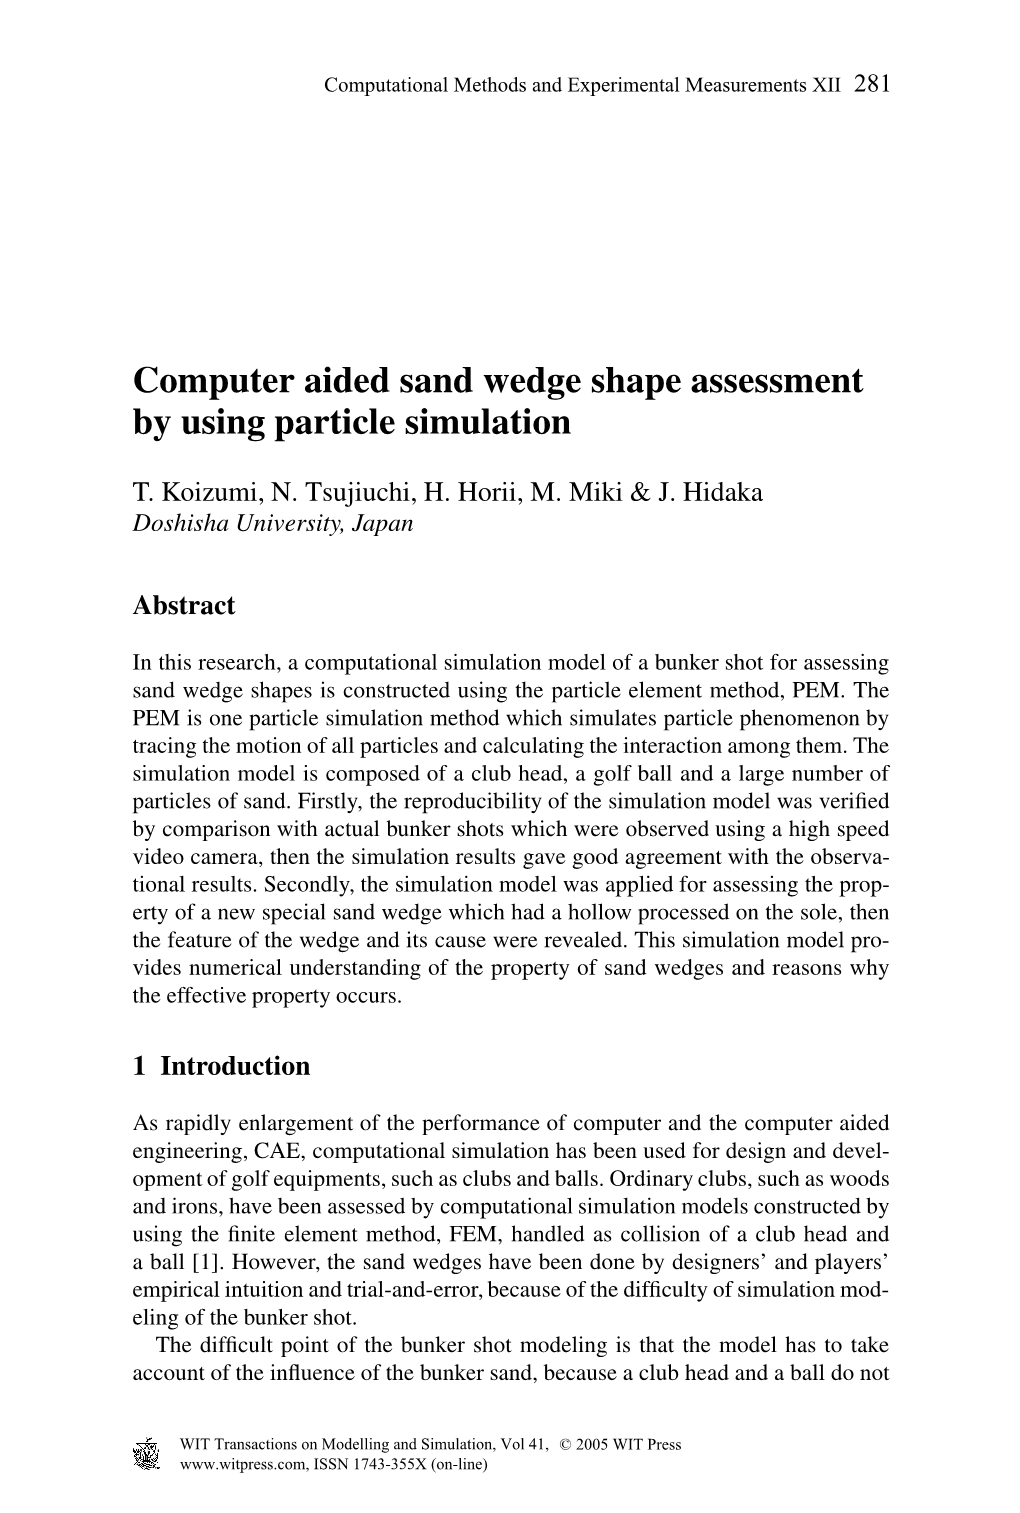 Computer Aided Sand Wedge Shape Assessment by Using Particle Simulation